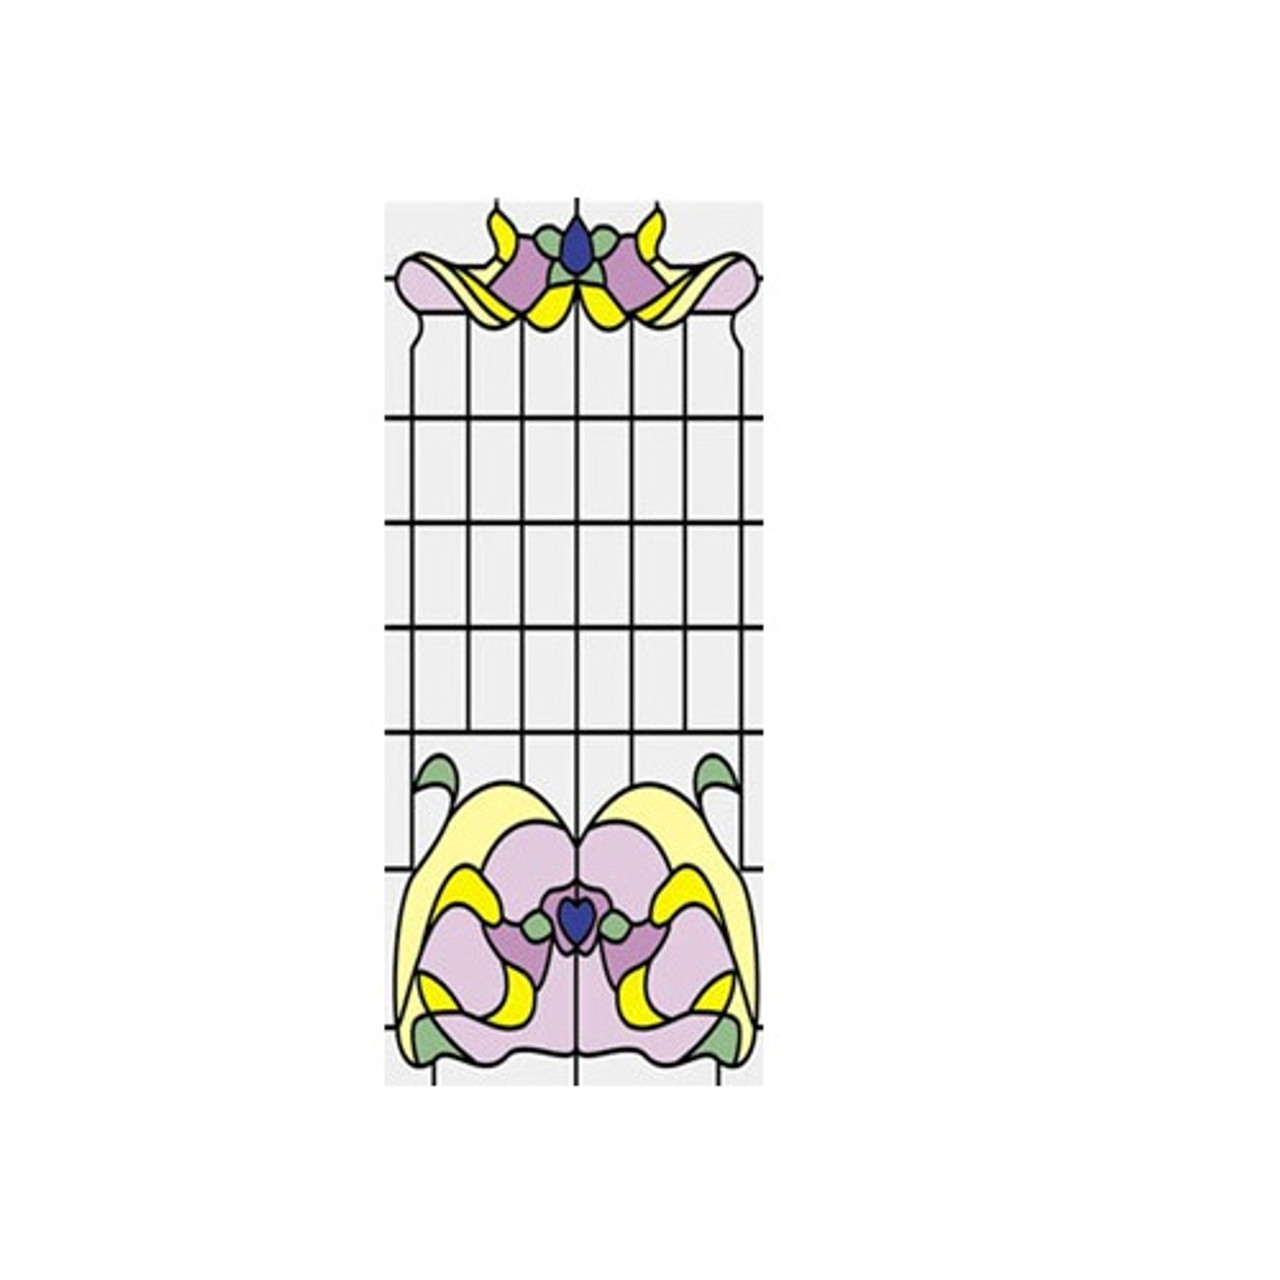 Simulated Stained Glass (SLIM06)